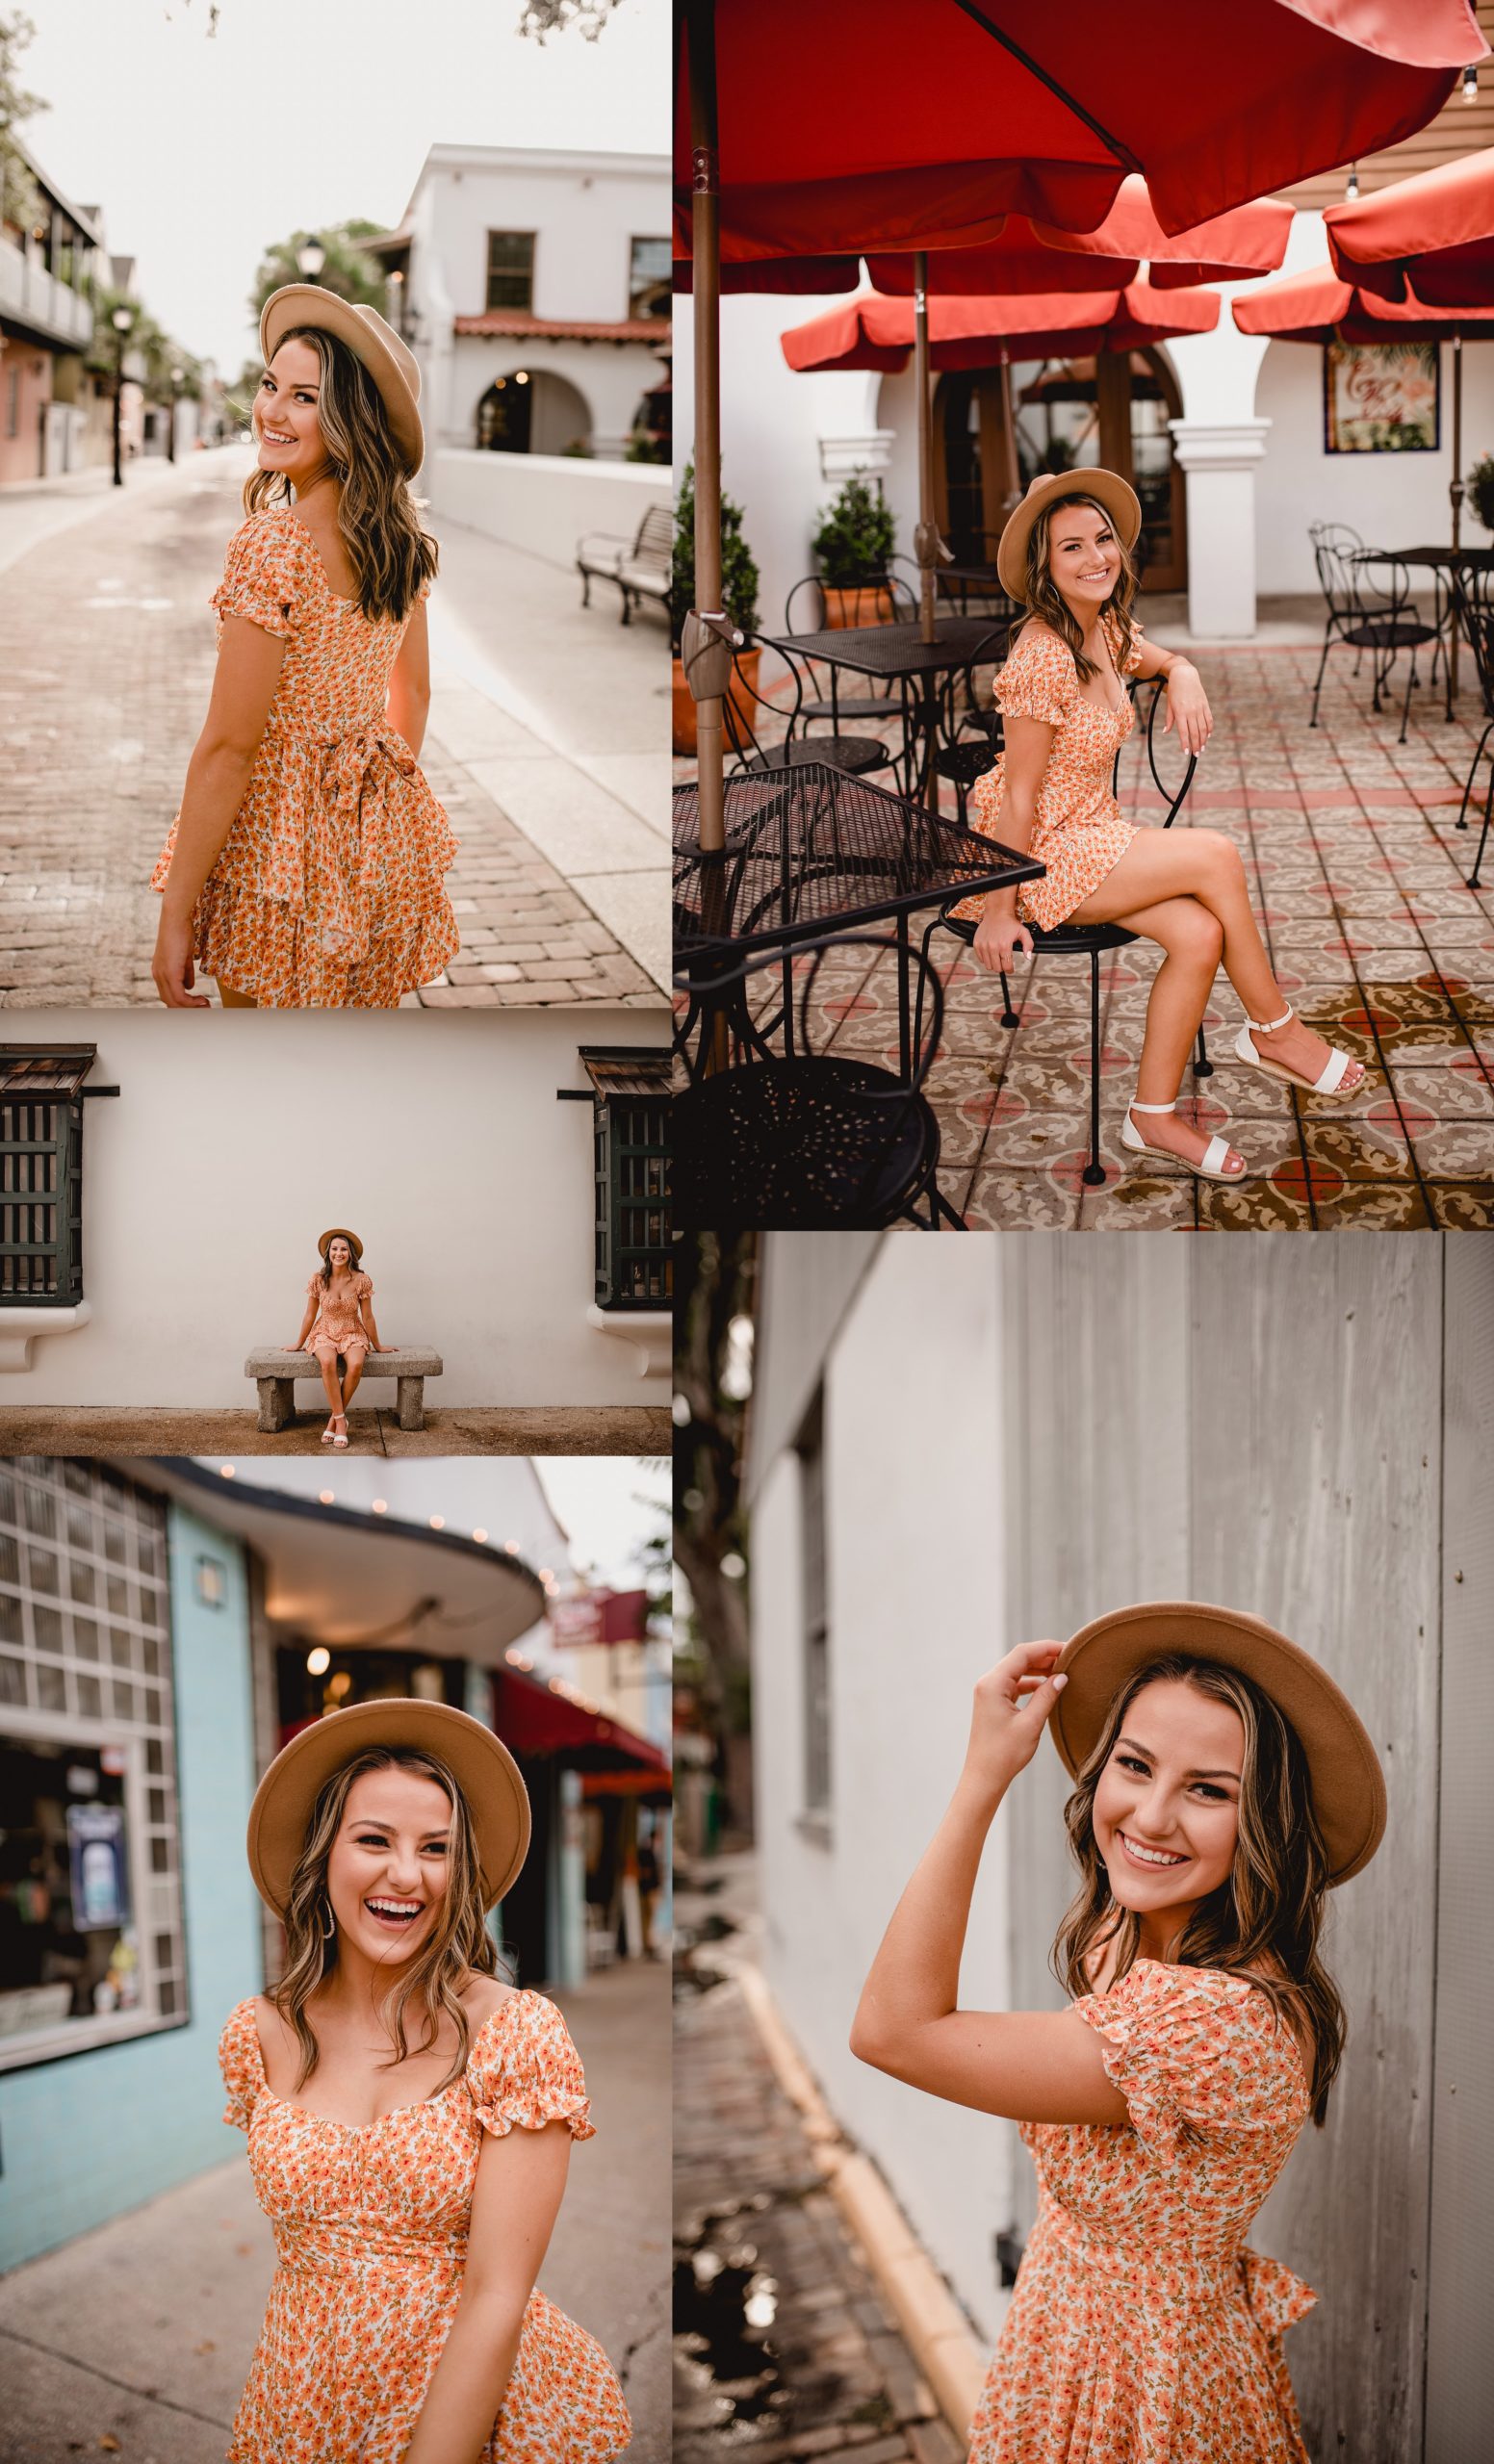 Posing ideas for senior wearing a hat